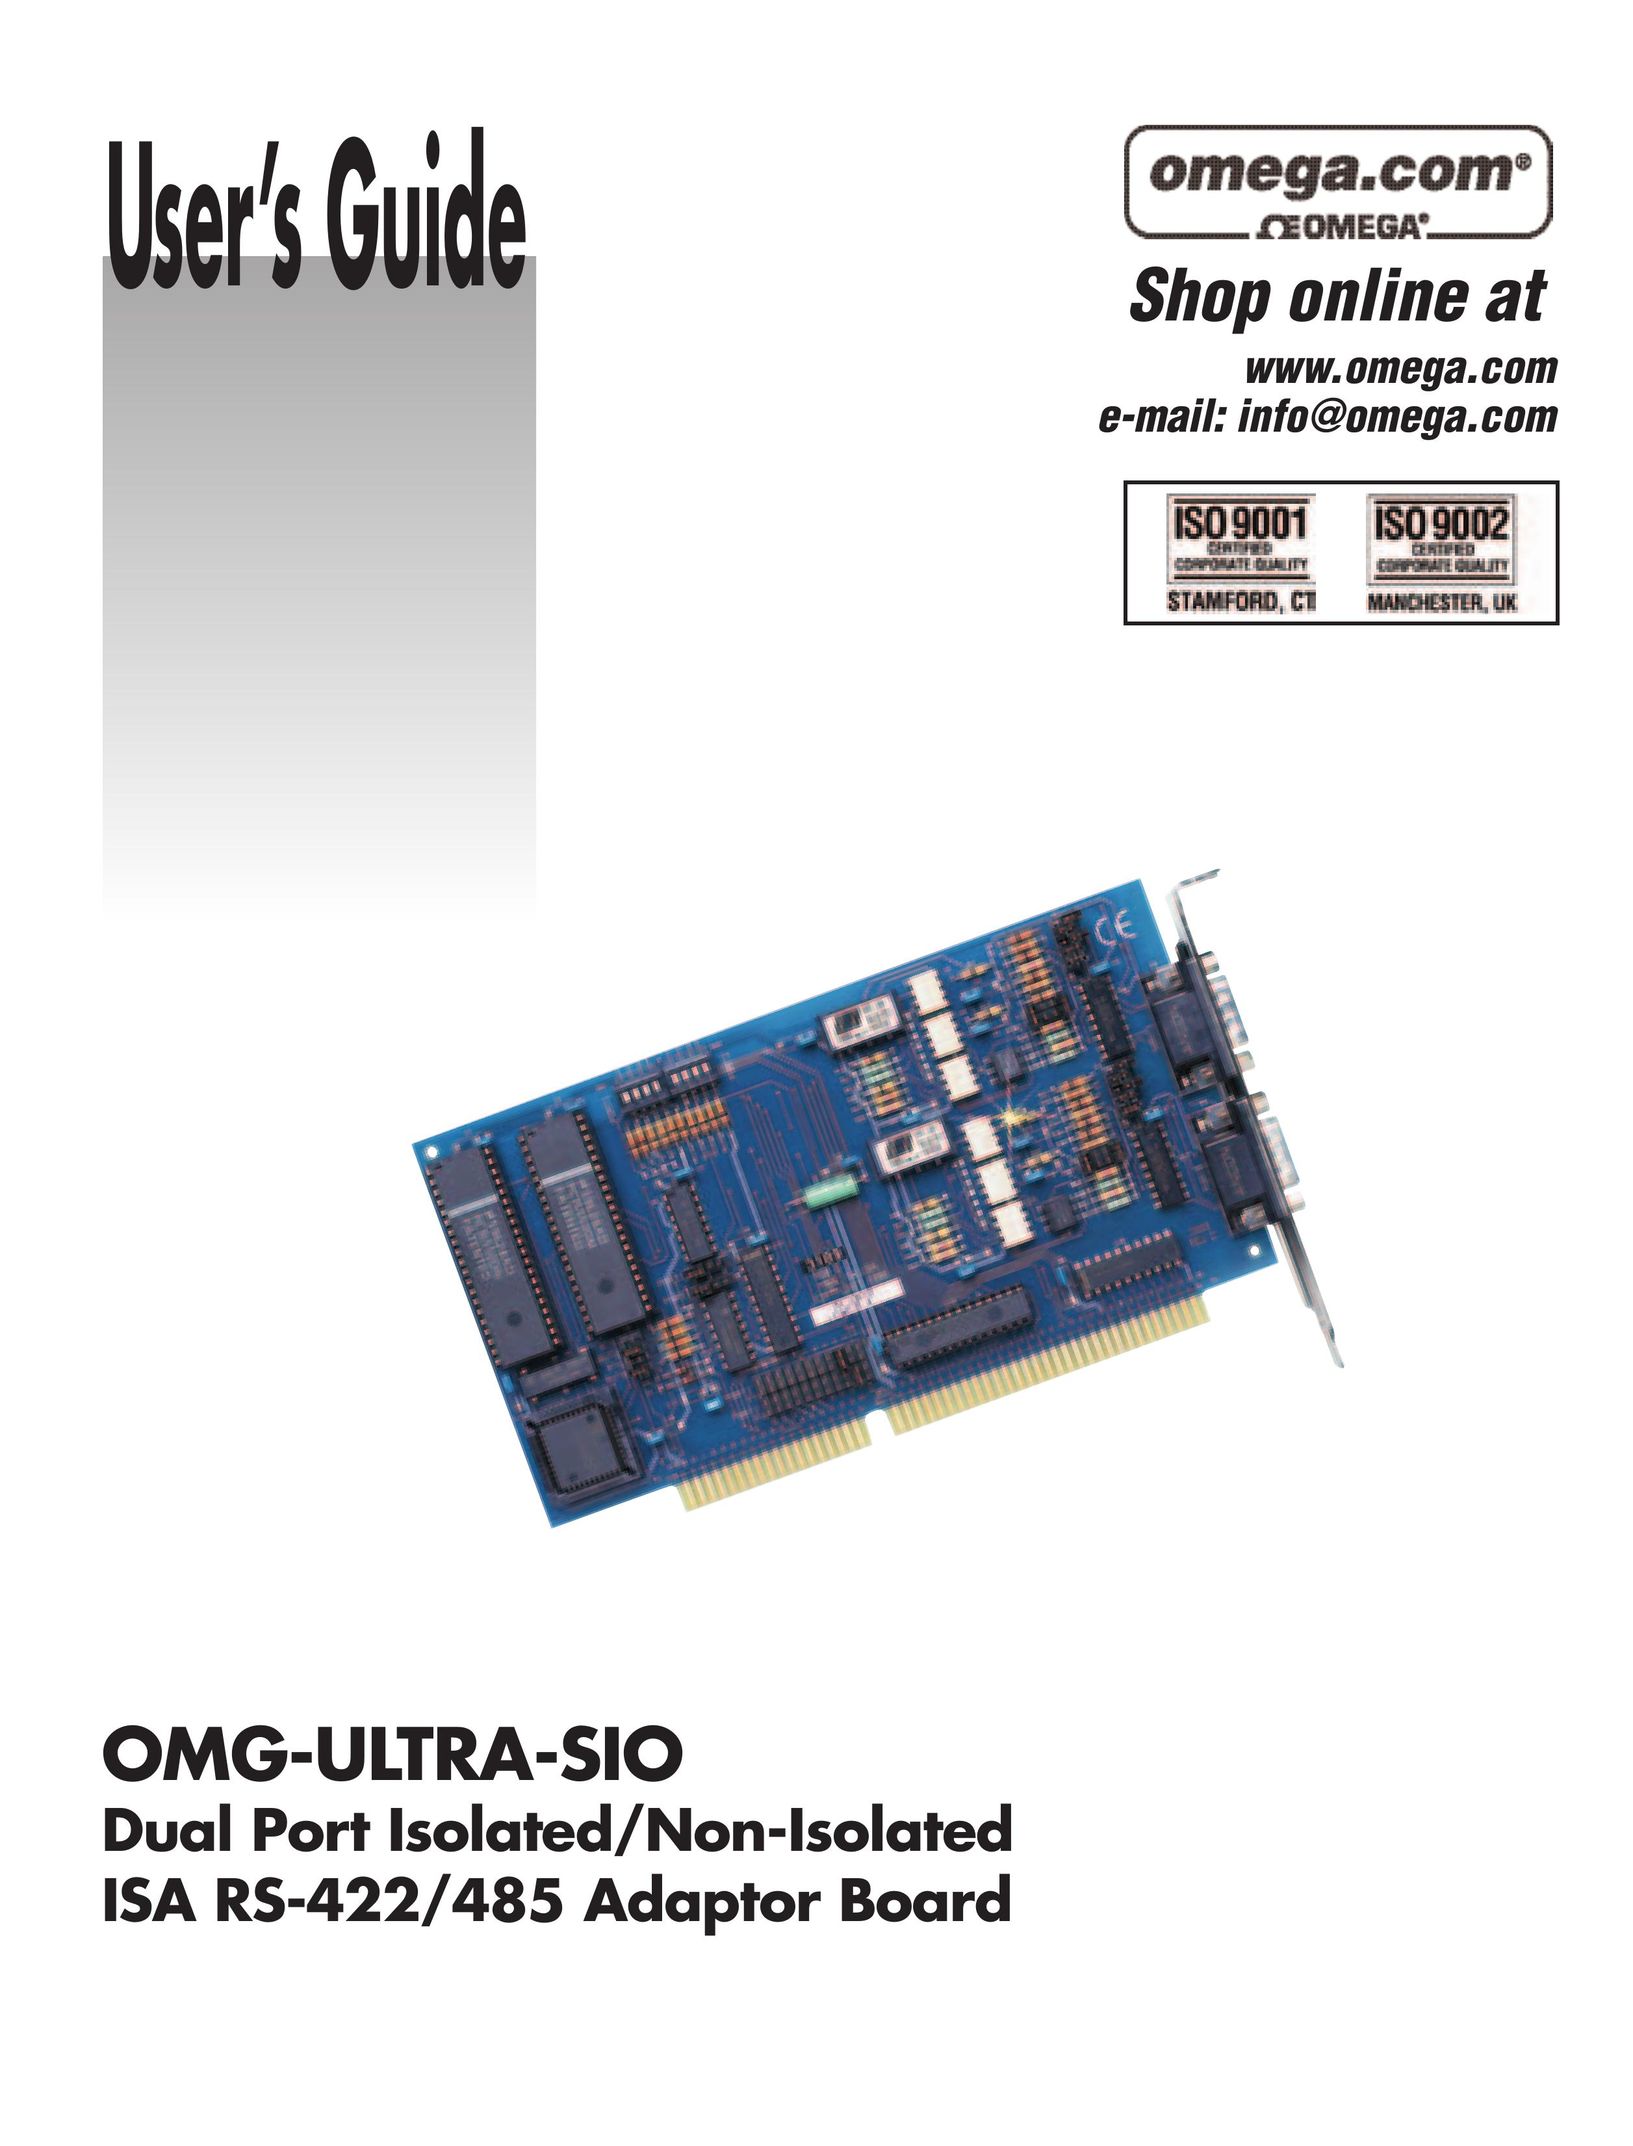 Omega Vehicle Security ISA RS-422 Network Card User Manual